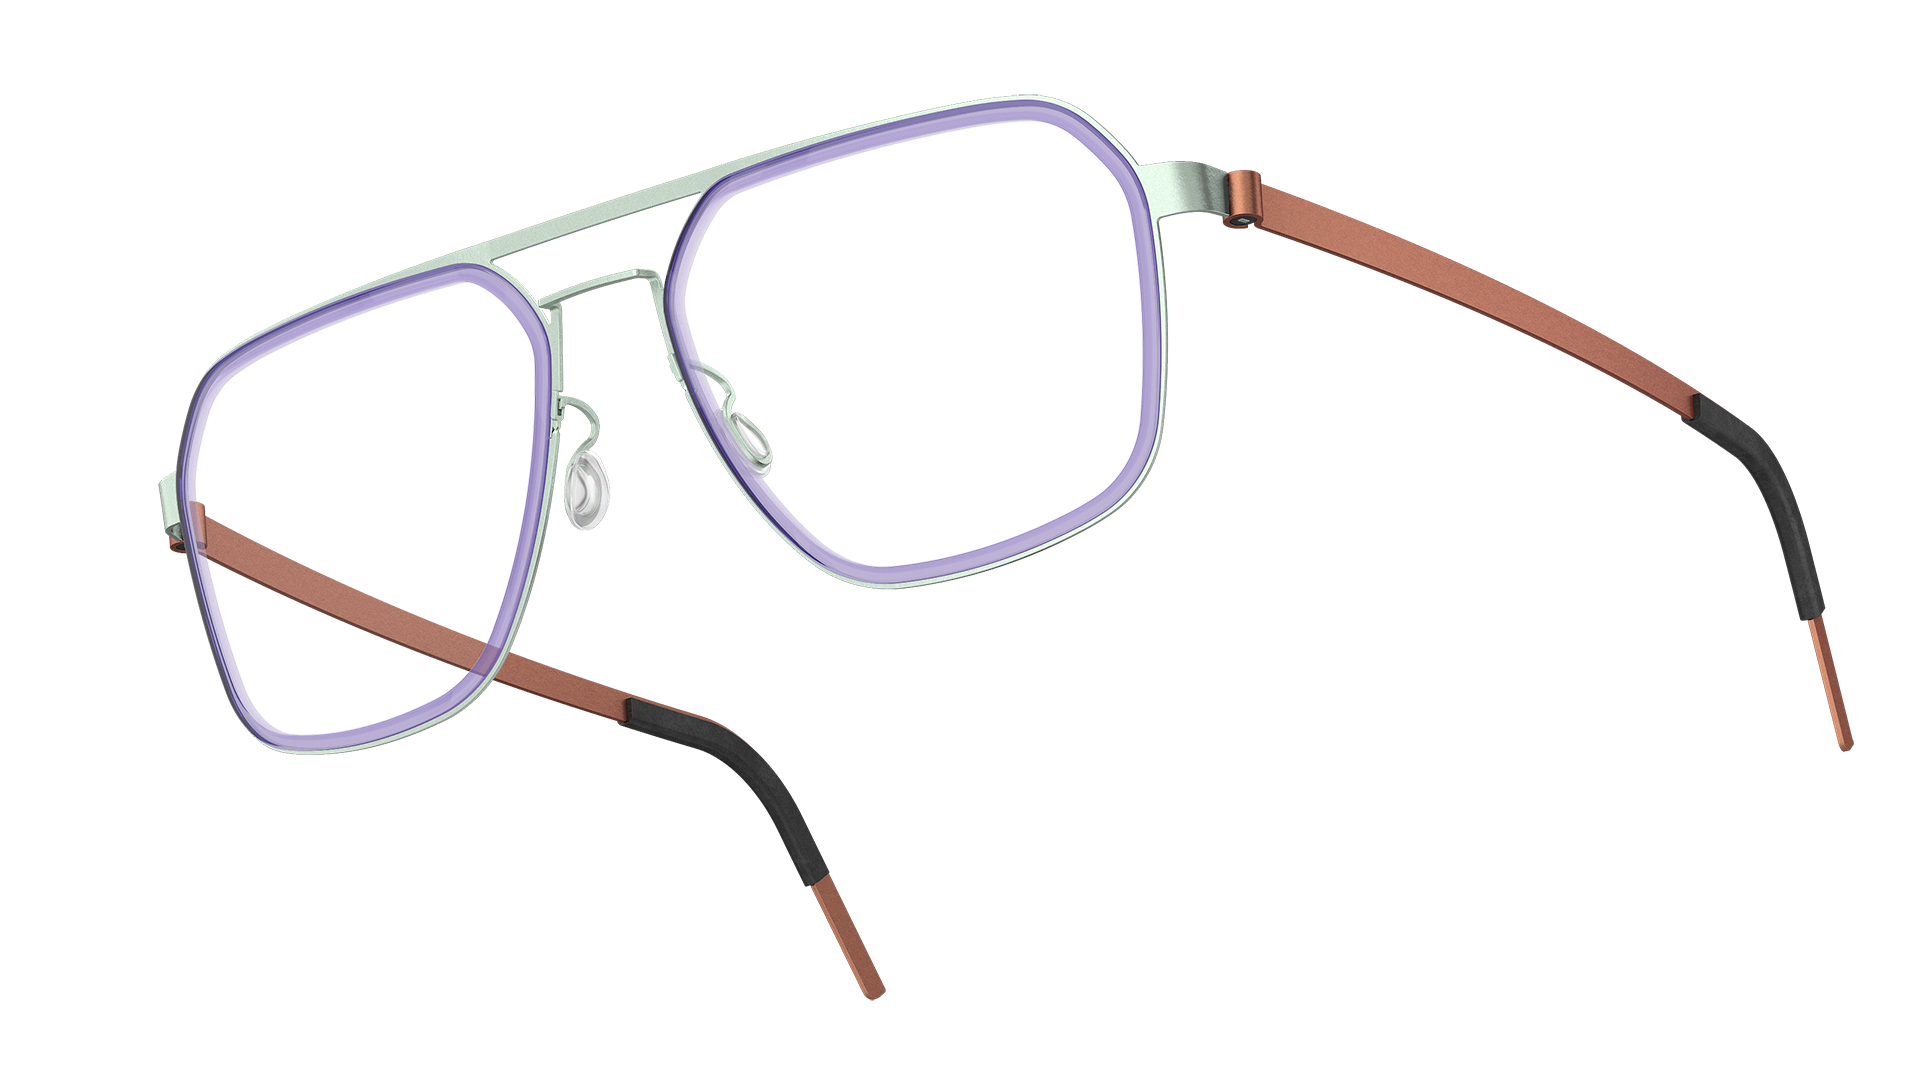 LINDBERG strip Model 9753 double bar square shape glasses with a blue front and brown titanium temples